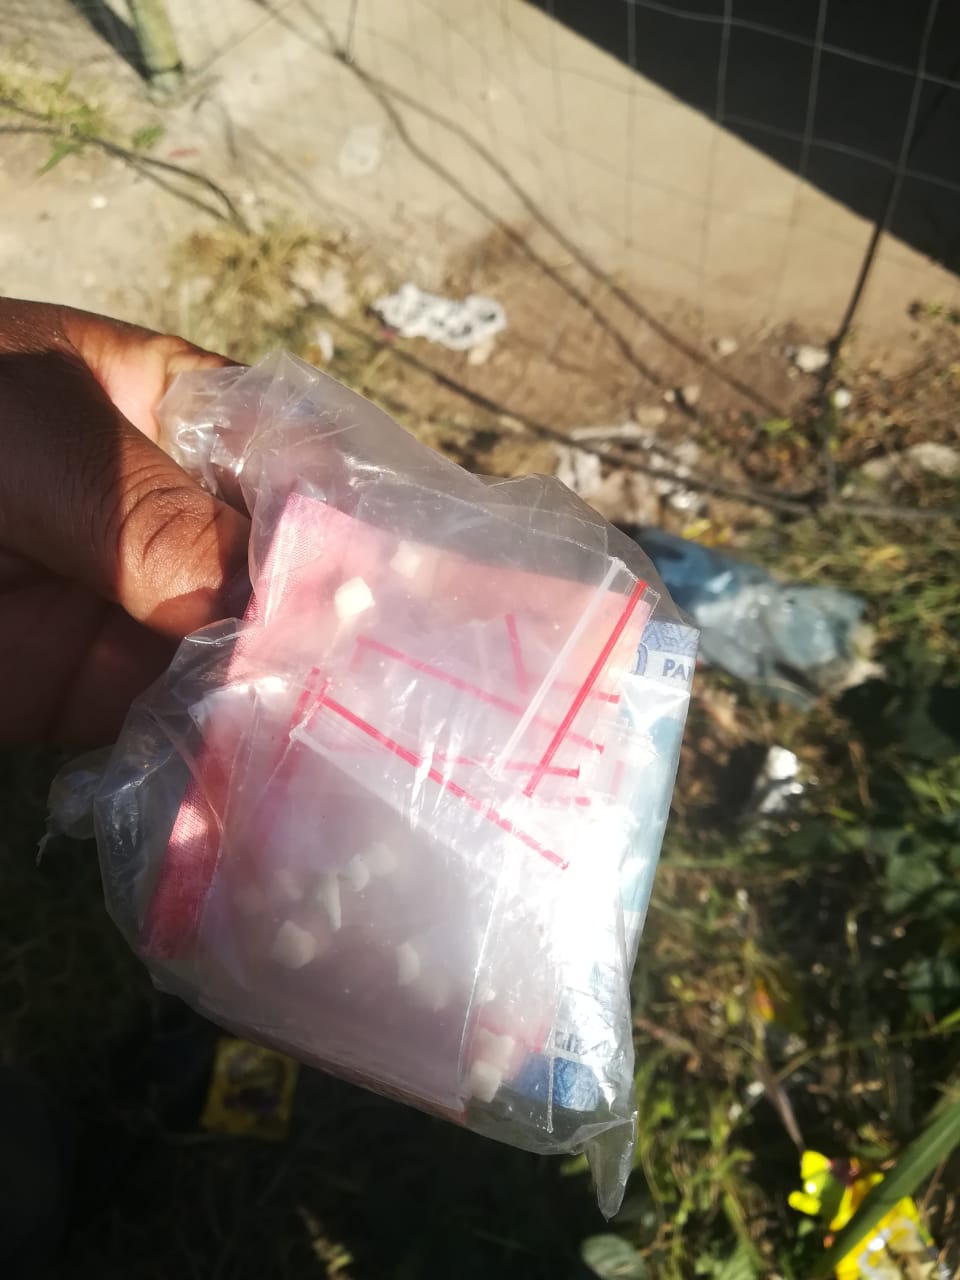 Multiple arrested for possession and selling of drugs in Pietermaritzburg